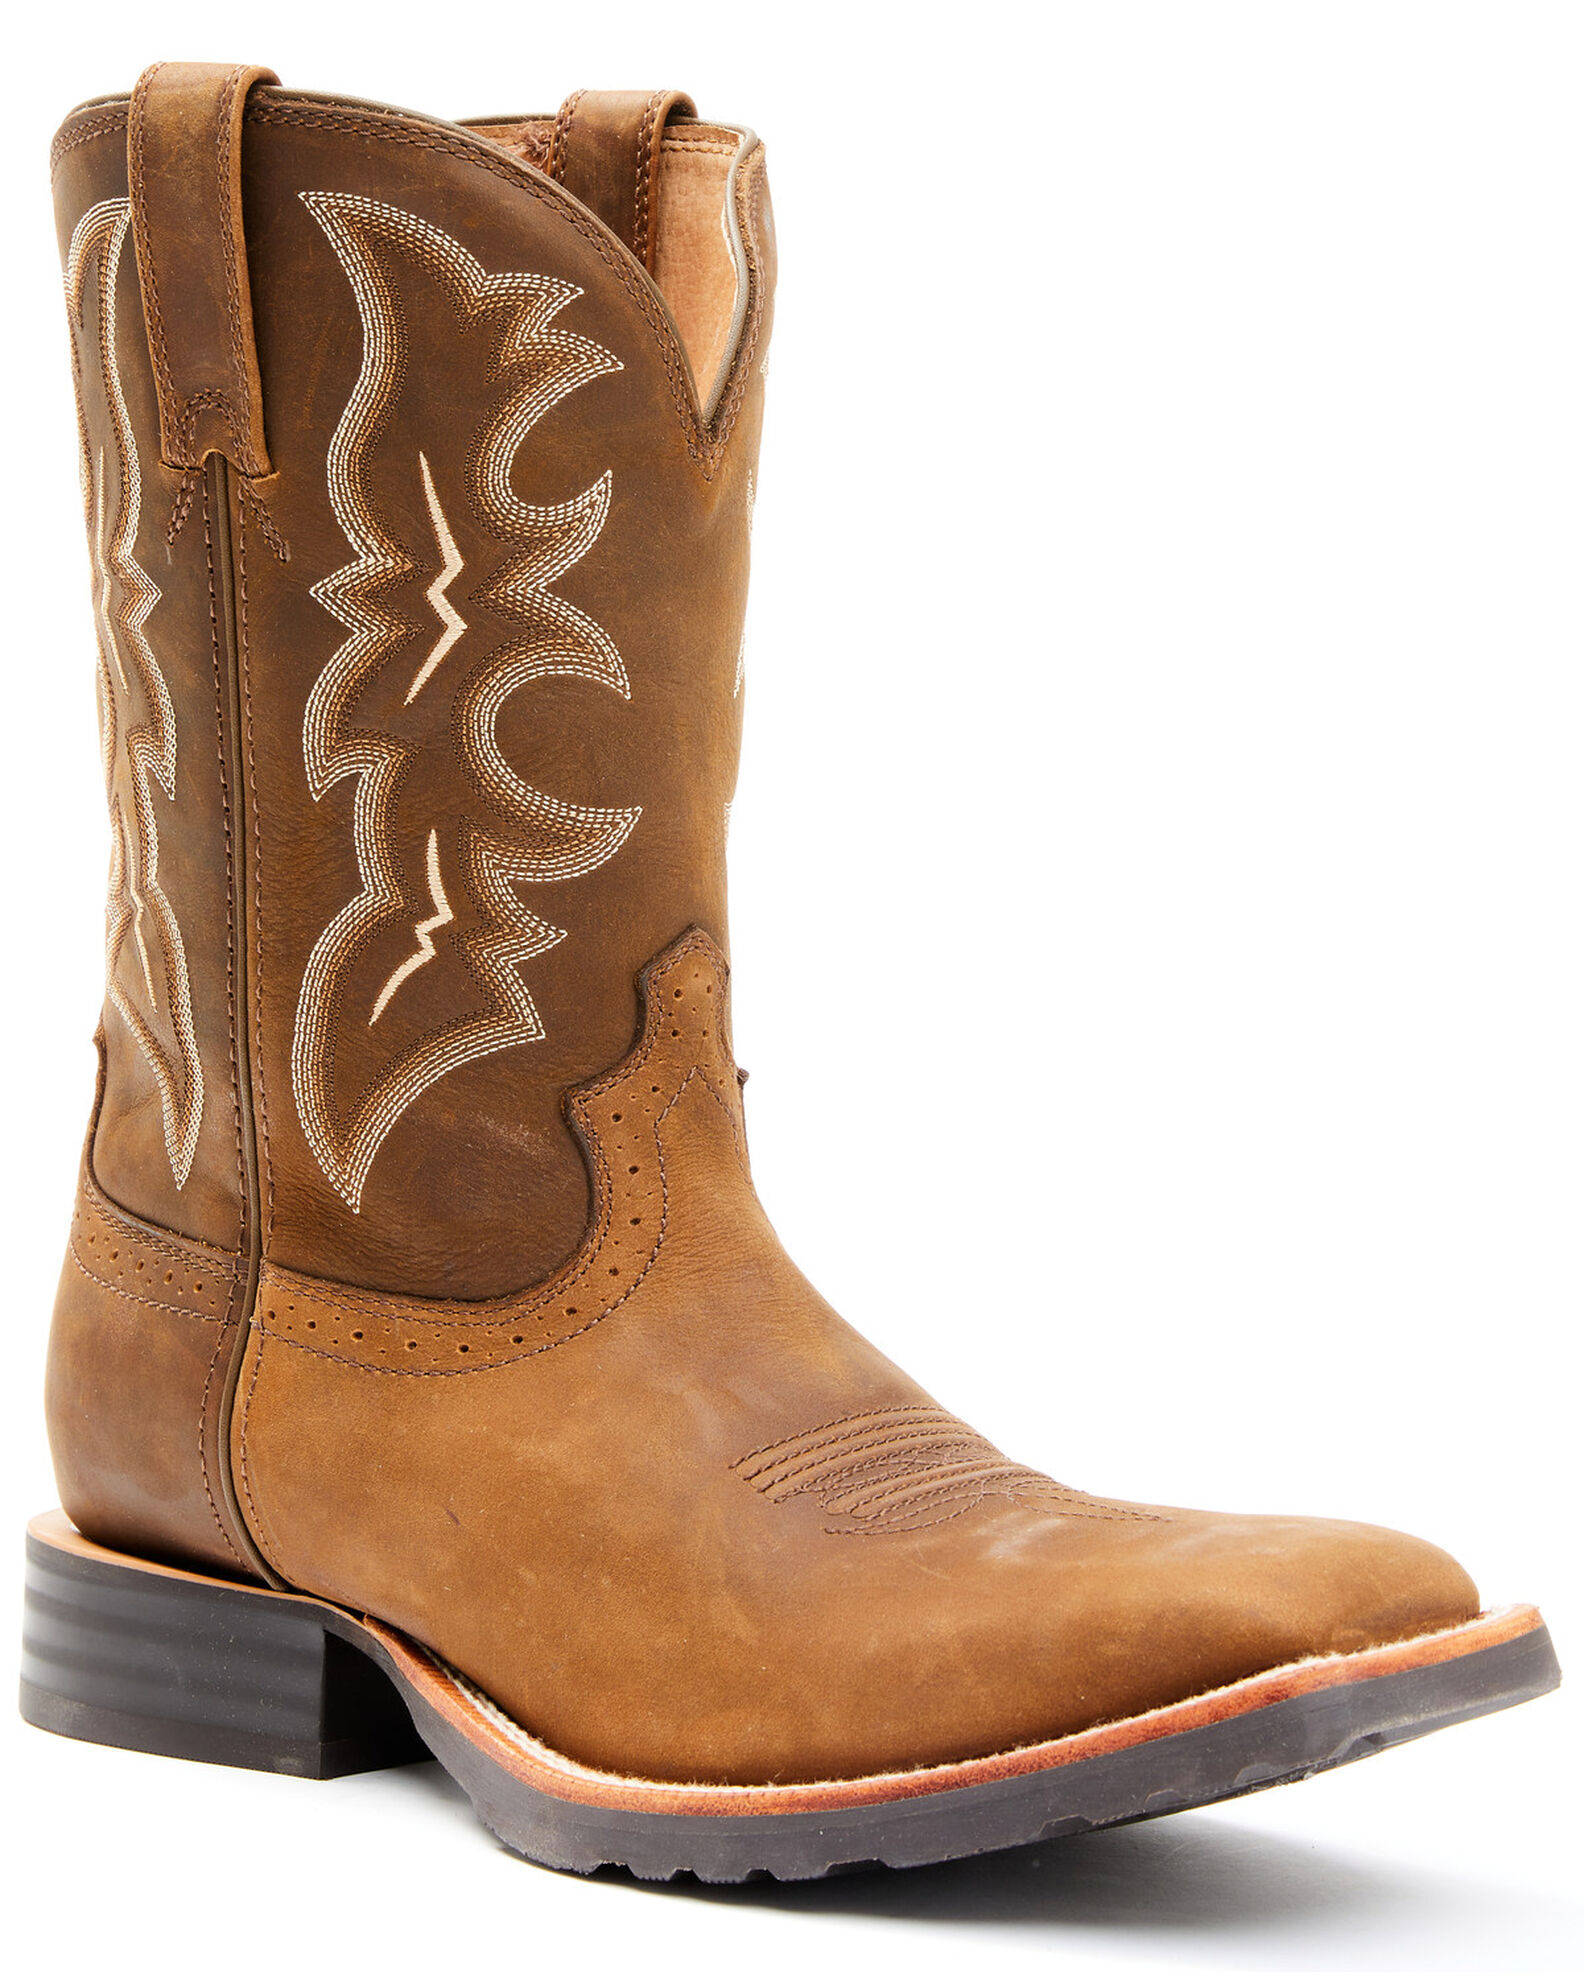 Wrangler Footwear Men's All-Around Western Boots Broad Square Toe | Boot